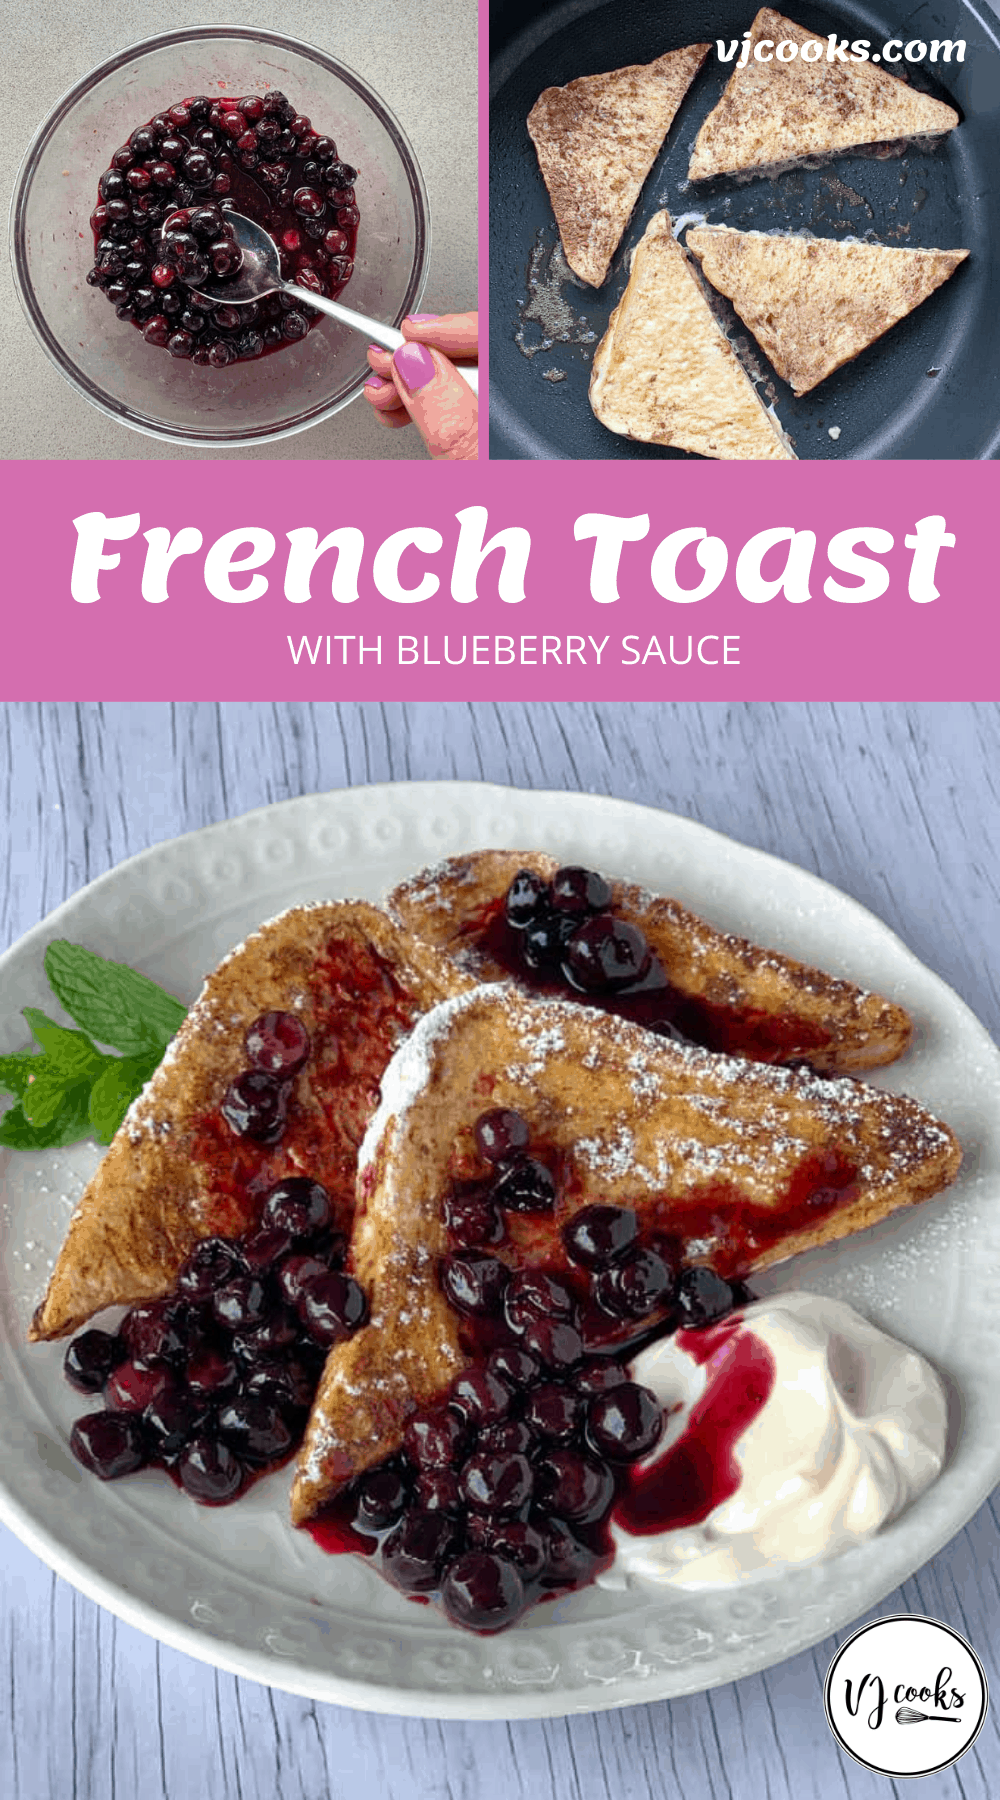 French Toast with blueberry sauce